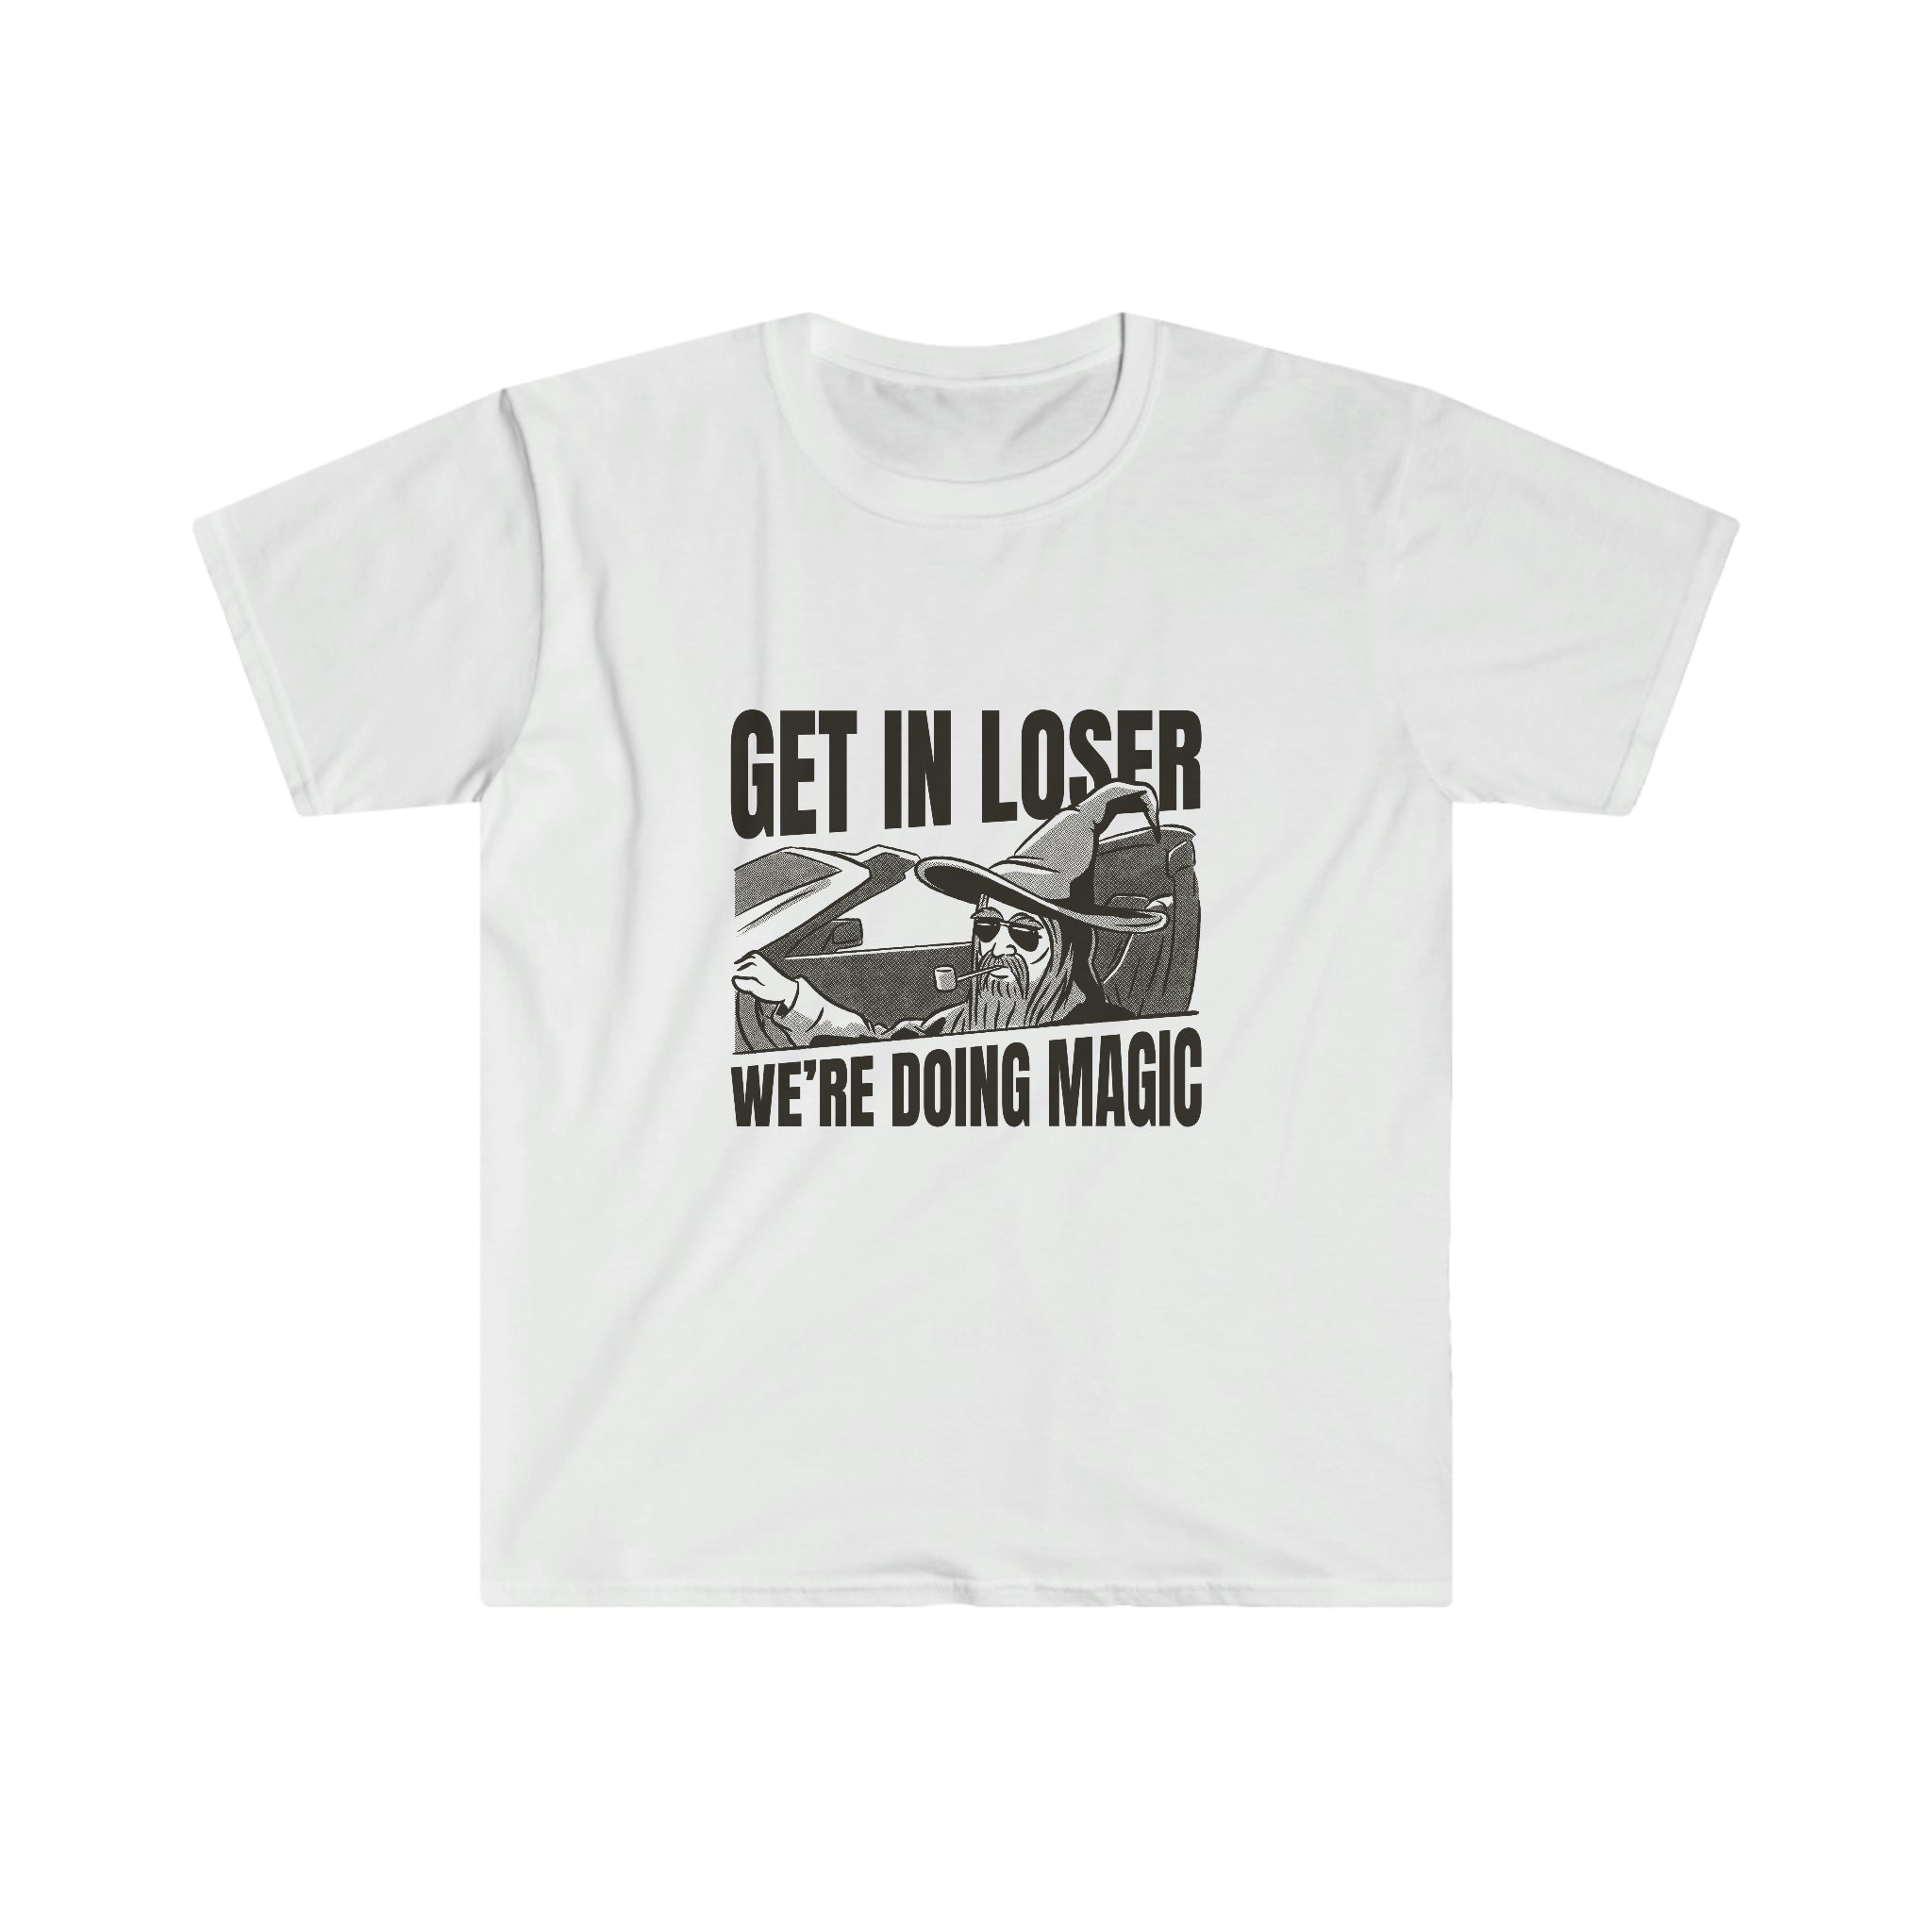 A Get In Loser We are doing magic t-shirt with black text.